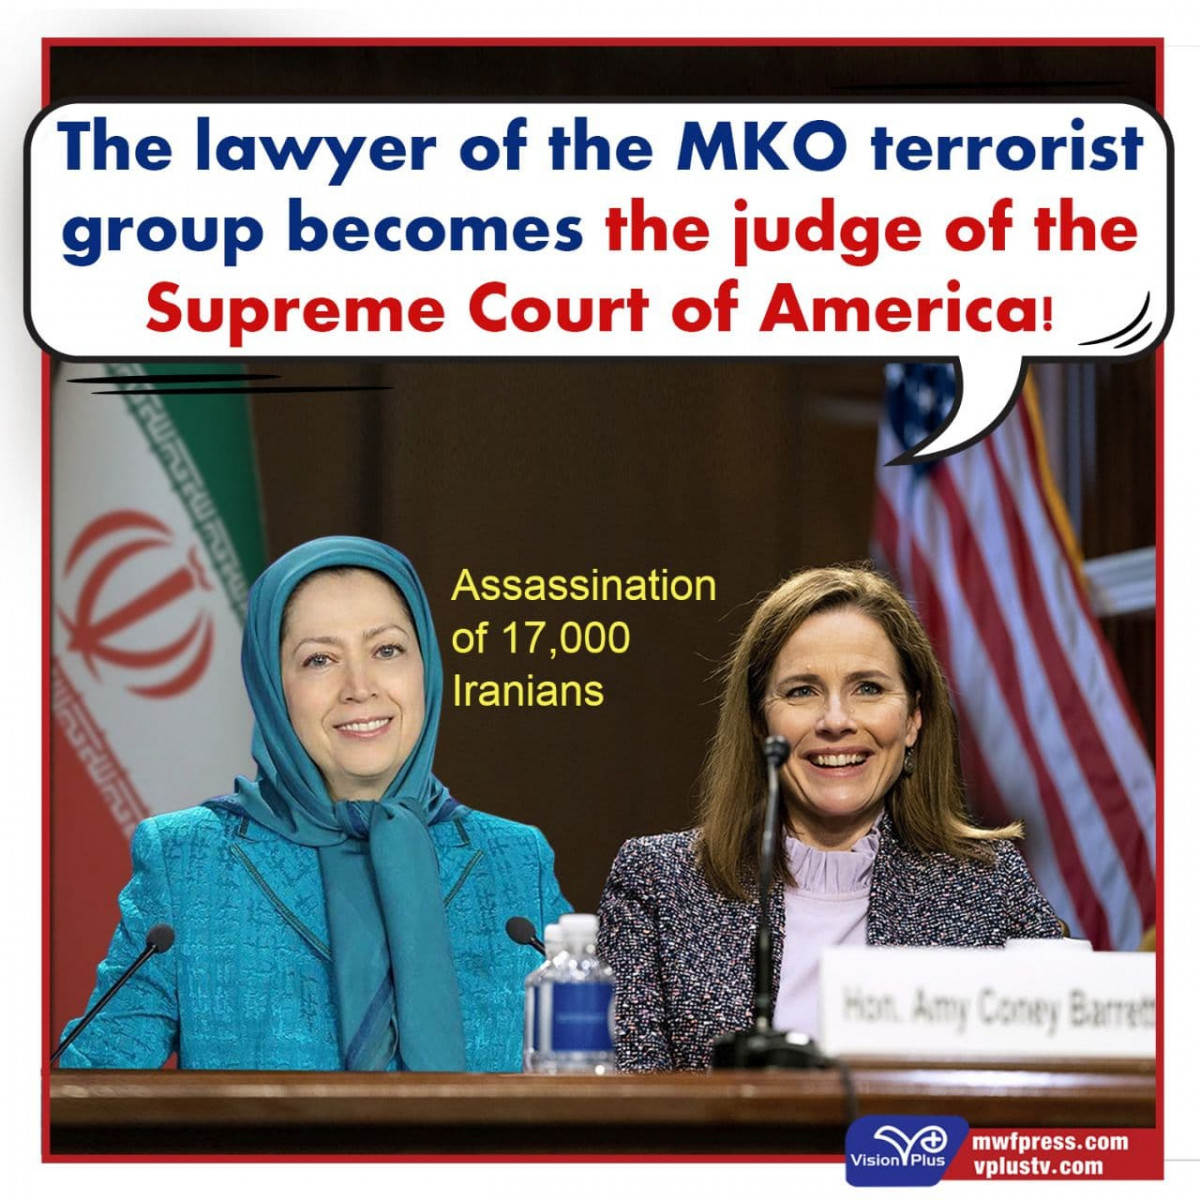 The lawyer of the MKO terrorist group becomes the judge of the Supreme Court of America